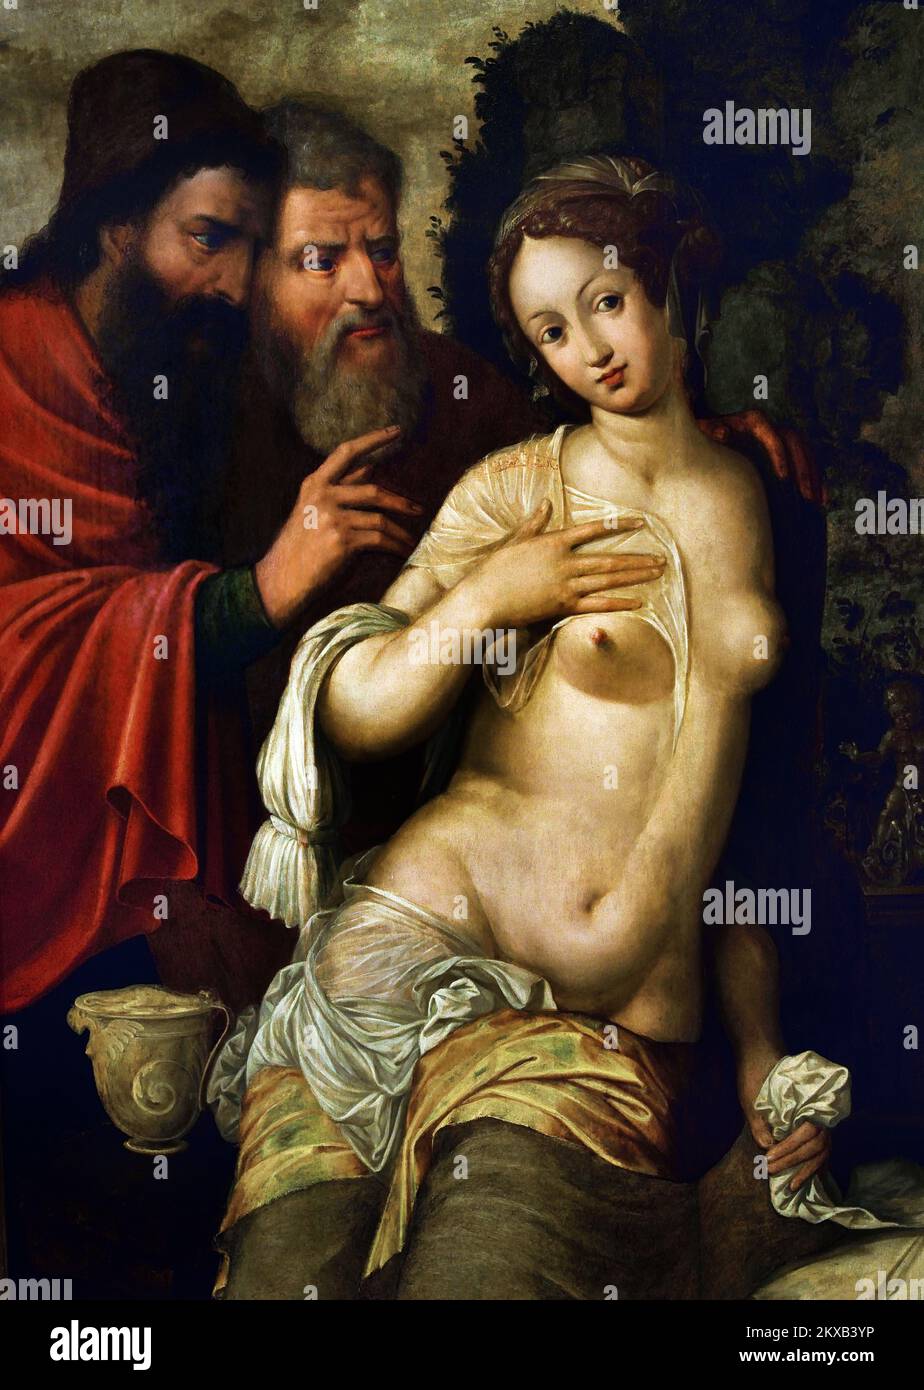 Suzanna and the two old men by SELLAER Vincent, Mechelen, 1500 -1589, 16th century, Belgian, Belgium, Flemish, Susanna and the Elders, wealthy Babylonian Jewish woman